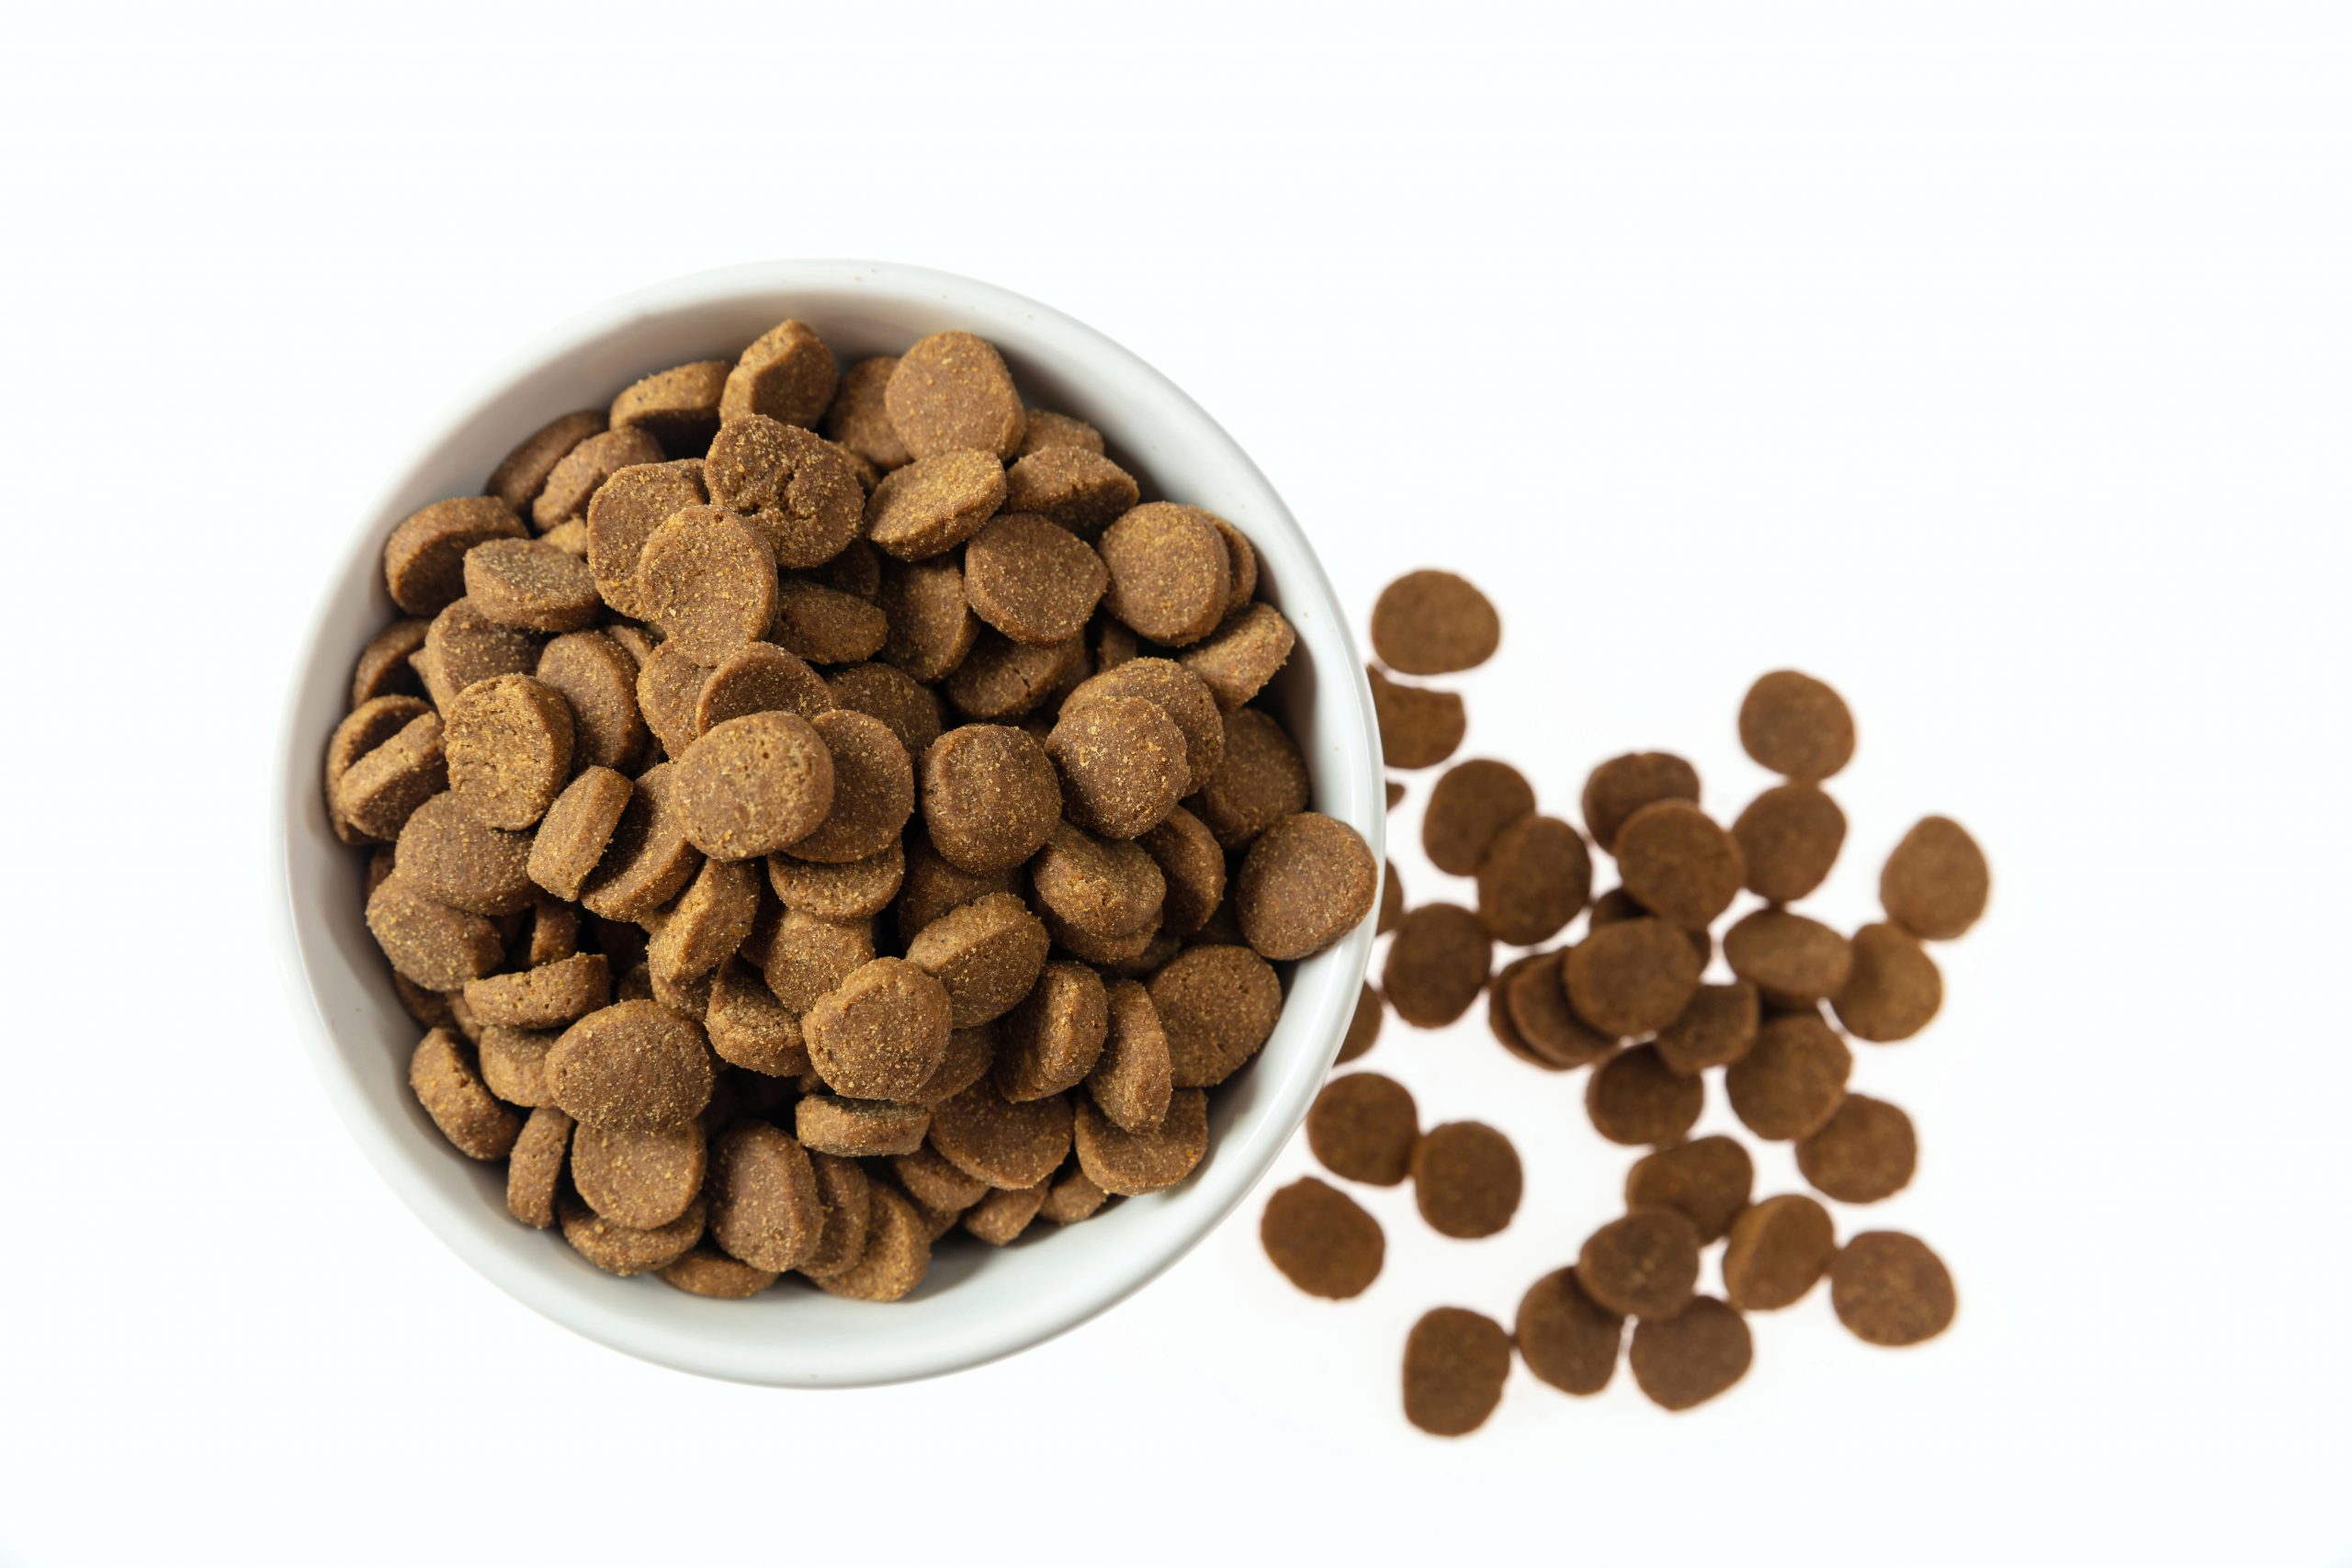 http://pugedon.com.tr/wp-content/uploads/2020/02/dogs-or-cats-dry-food-in-a-white-bowl-isolated-on-PK4J3H5-scaled.jpg